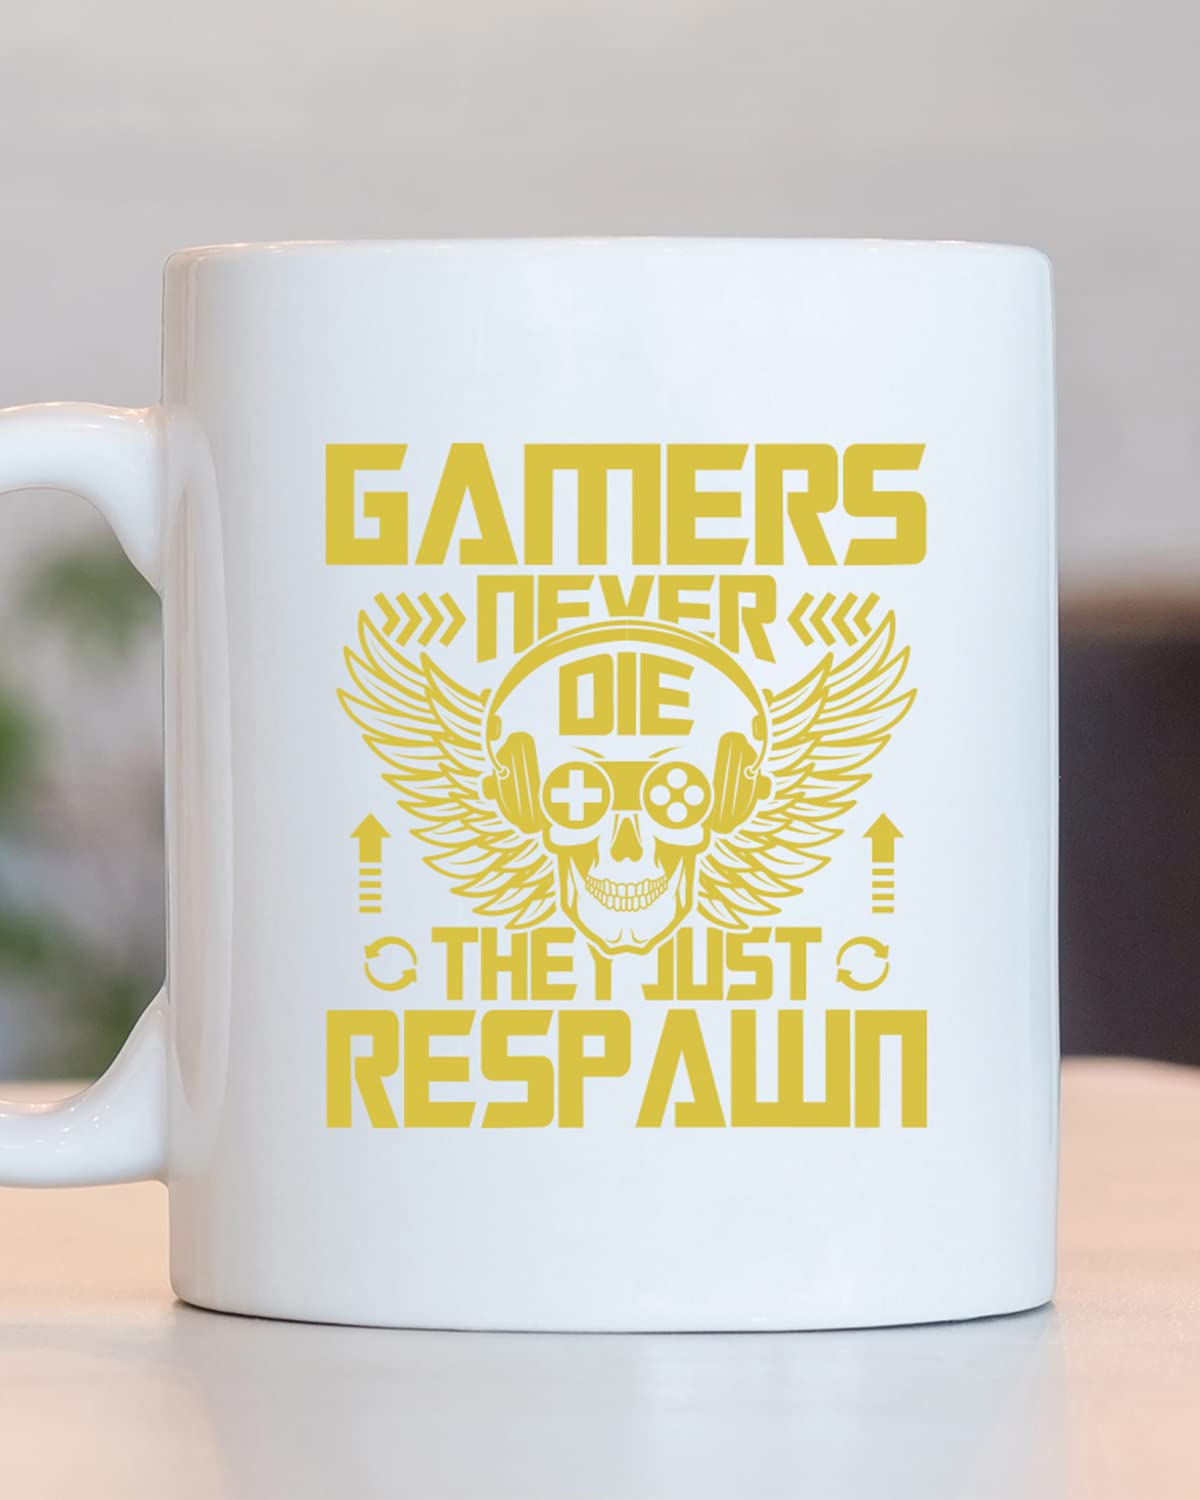 GAMERS NEVER DIE Coffee Mug - Unique Gifts For Game Lovers, Gamer Mugs, Gifts For Gaming Fans, Gaming Coffee Cup for Husband Boyfriend Birthday, Valentine's Day Gift, Birthday Gift for gamer nerds